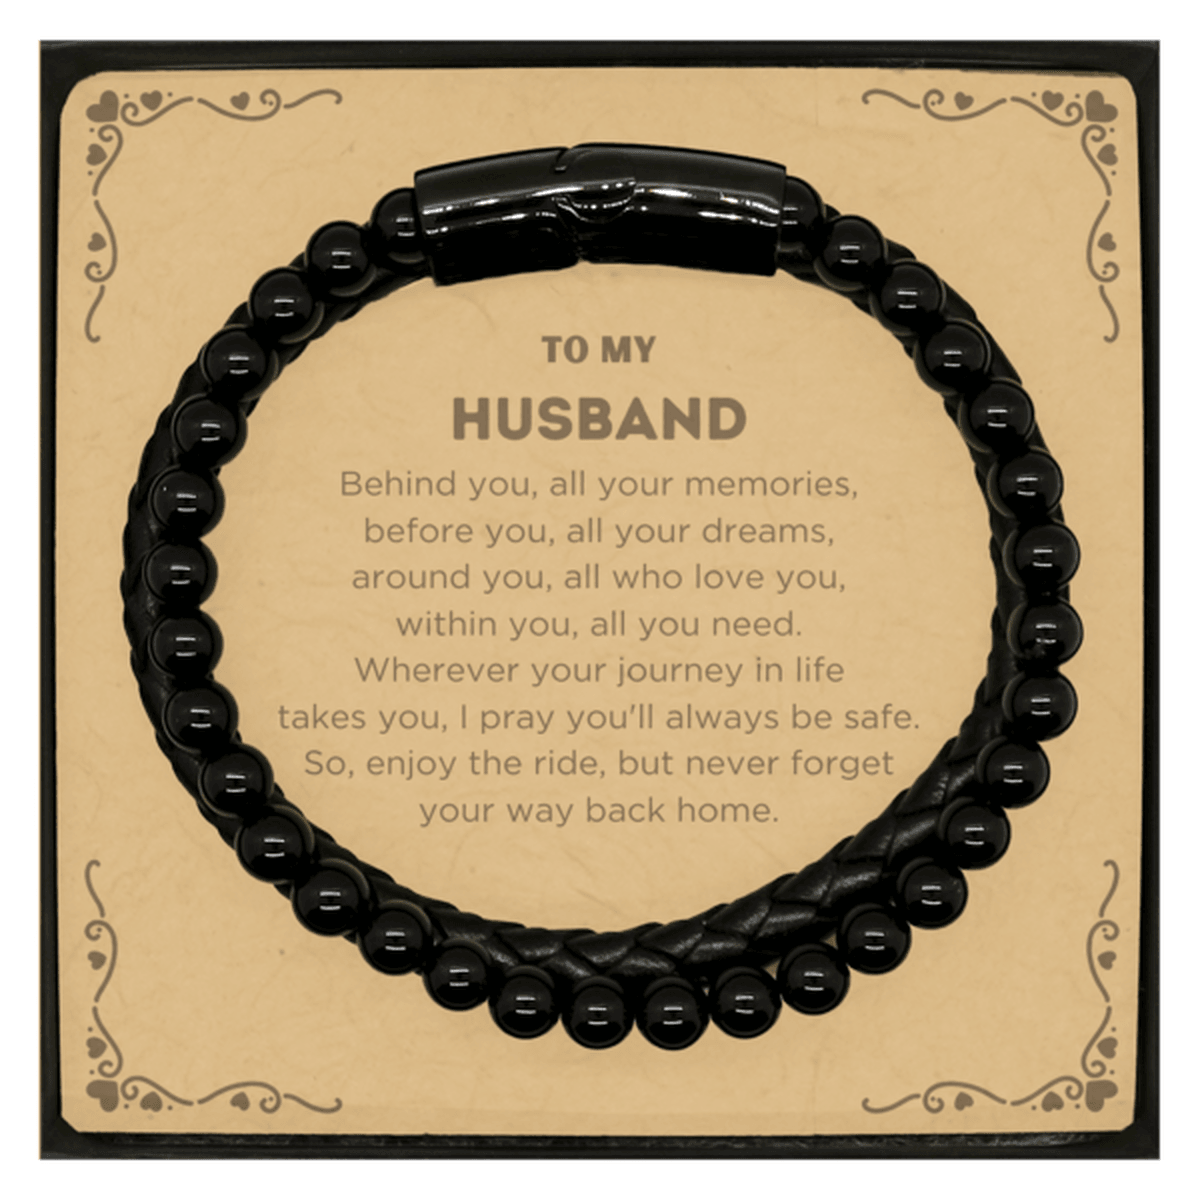 To My Husband Gifts, Inspirational Husband Stone Leather Bracelets, Sentimental Birthday Christmas Unique Gifts For Husband Behind you, all your memories, before you, all your dreams, around you, all who love you, within you, all you need - Mallard Moon Gift Shop